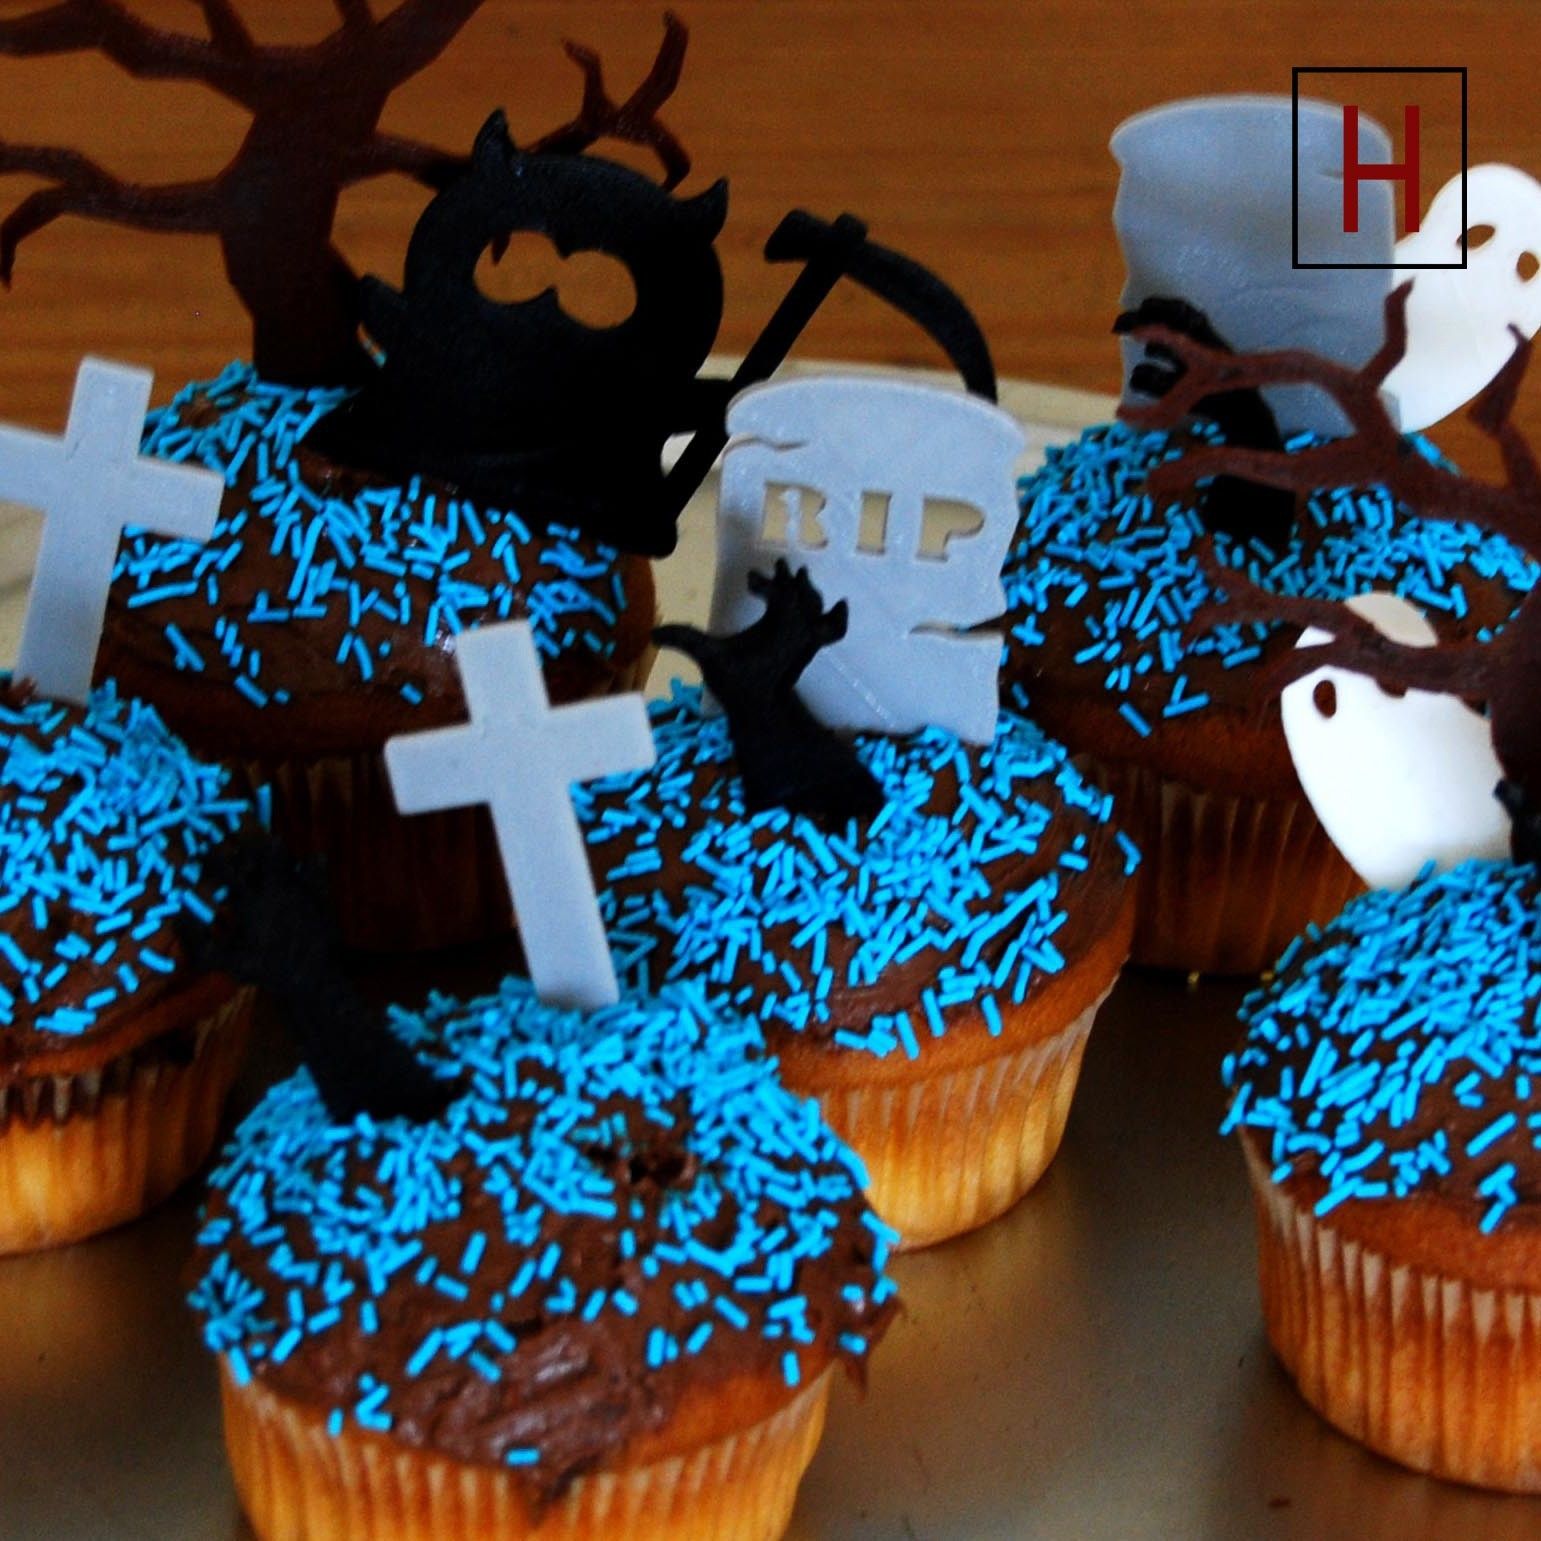 Cults - Night of the living muffins 2.jpg Download STL file Night of the living muffins • 3D printer design, InSpace